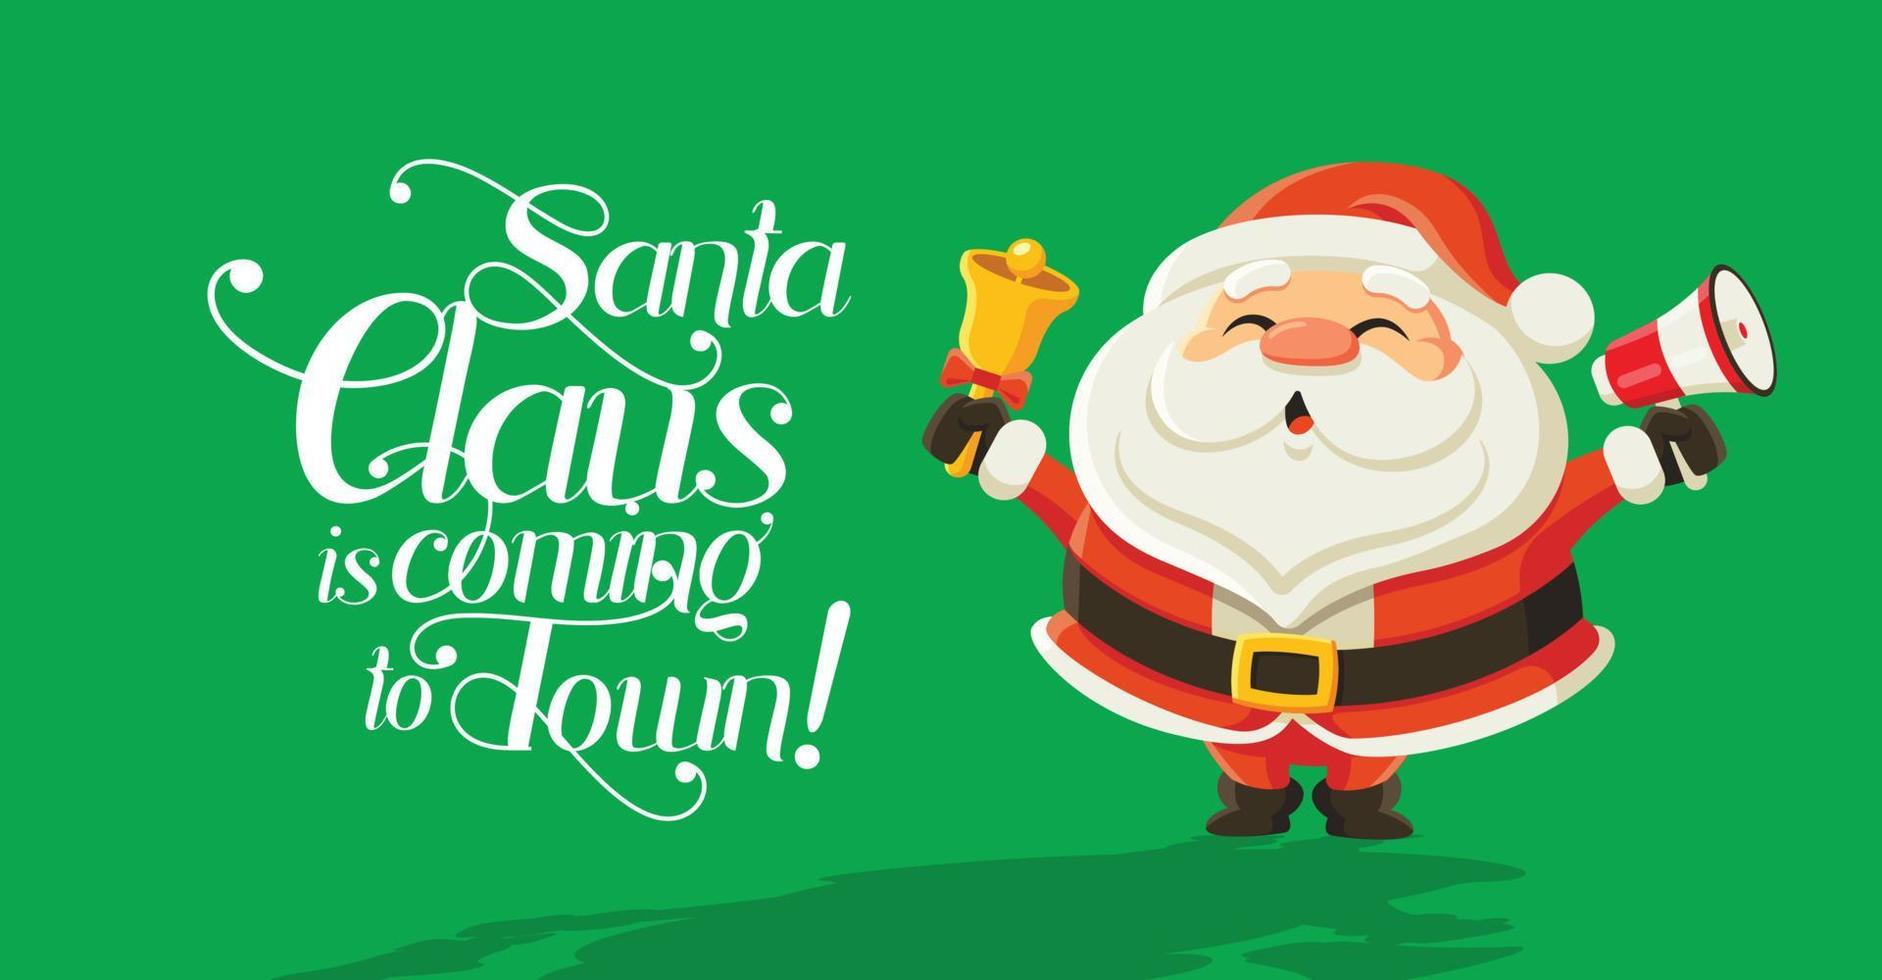 Funny cartoon Santa Claus holding bell and megaphone on green background with calligraphy lettering. For Christmas and New Year greeting card and social media use. Merry Christmas card vector